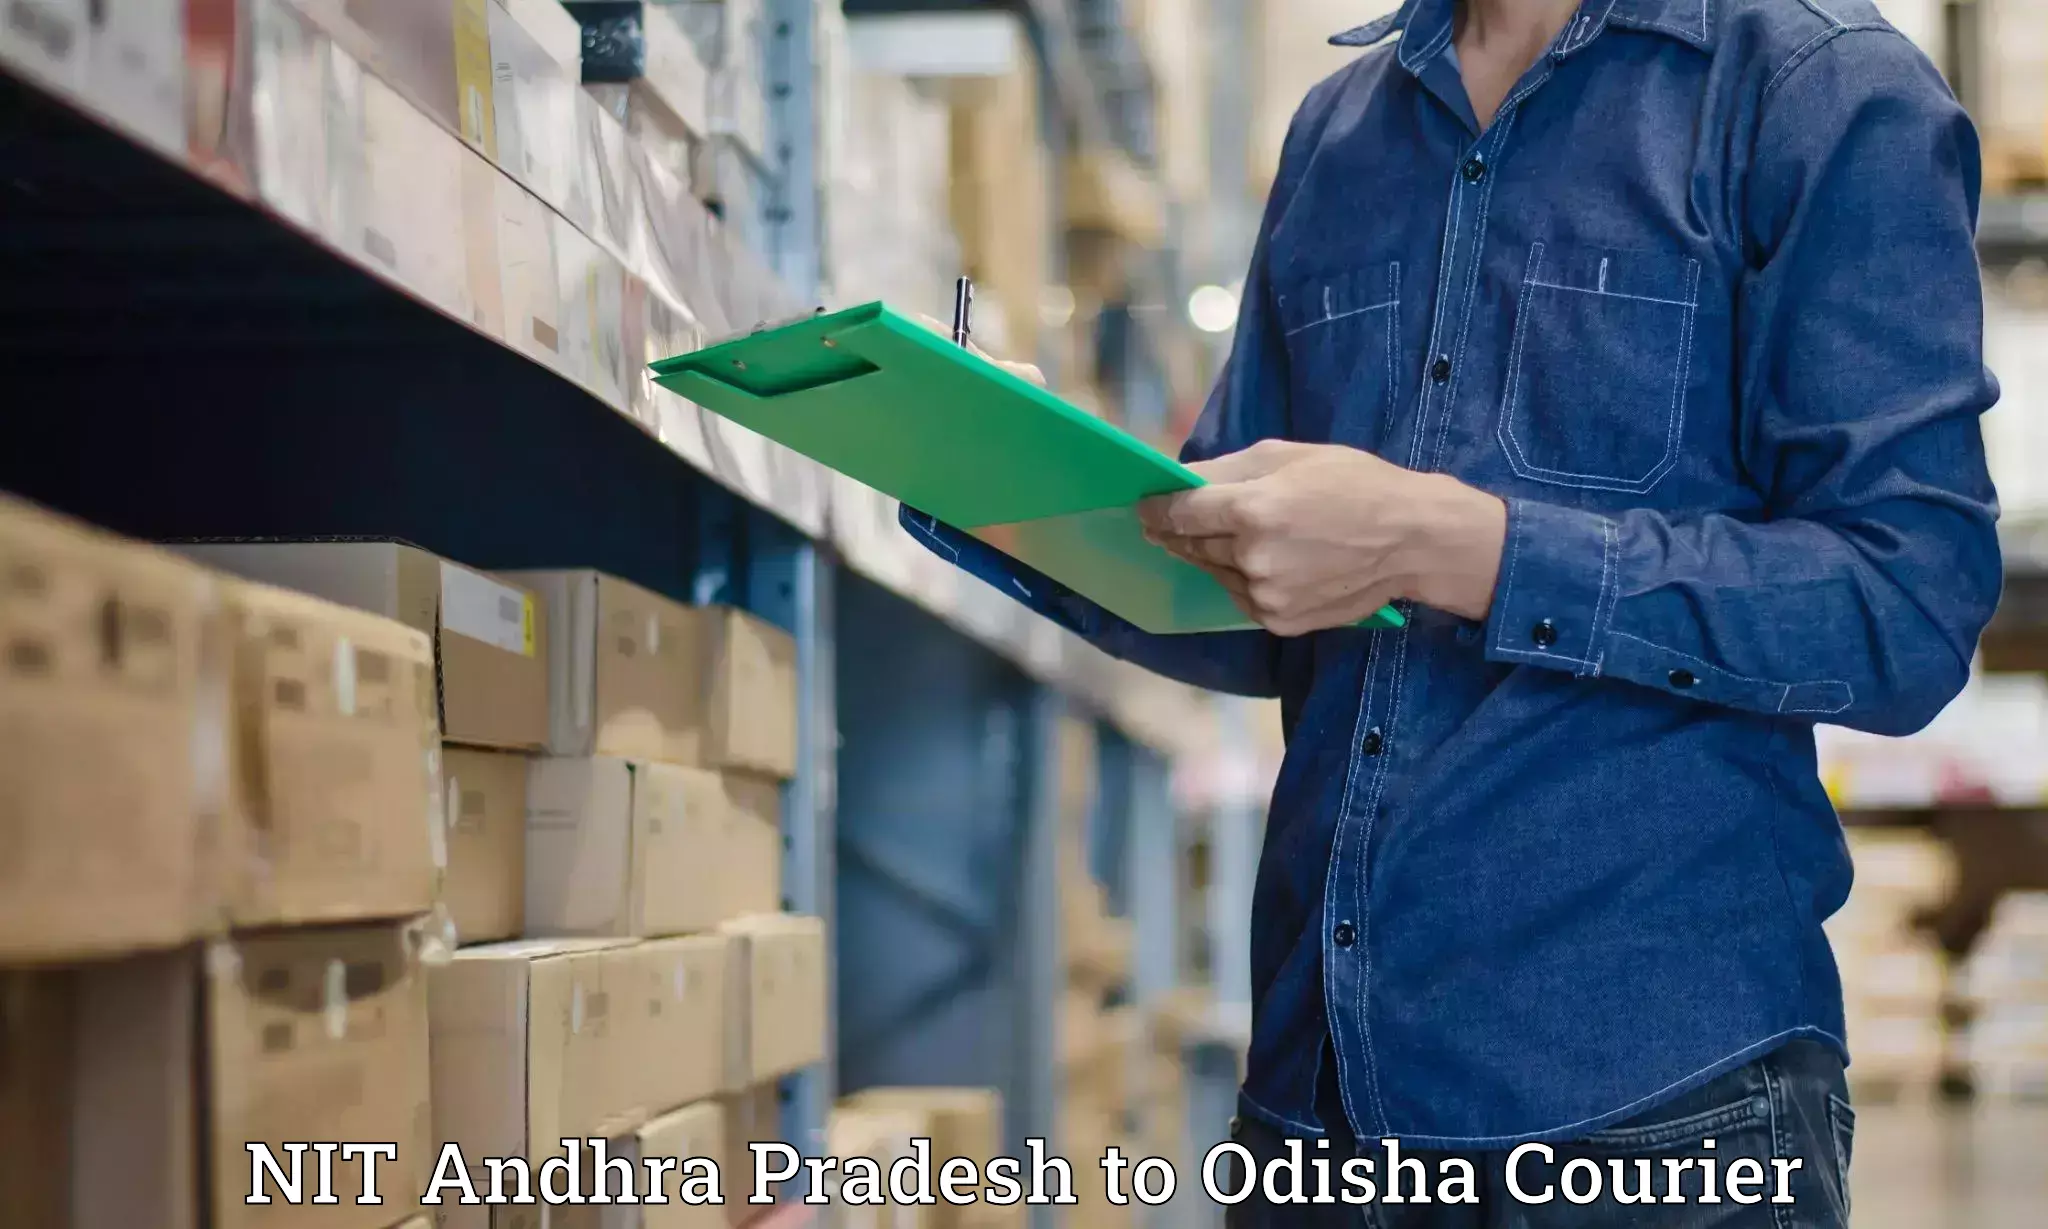 Personal courier services NIT Andhra Pradesh to Odisha